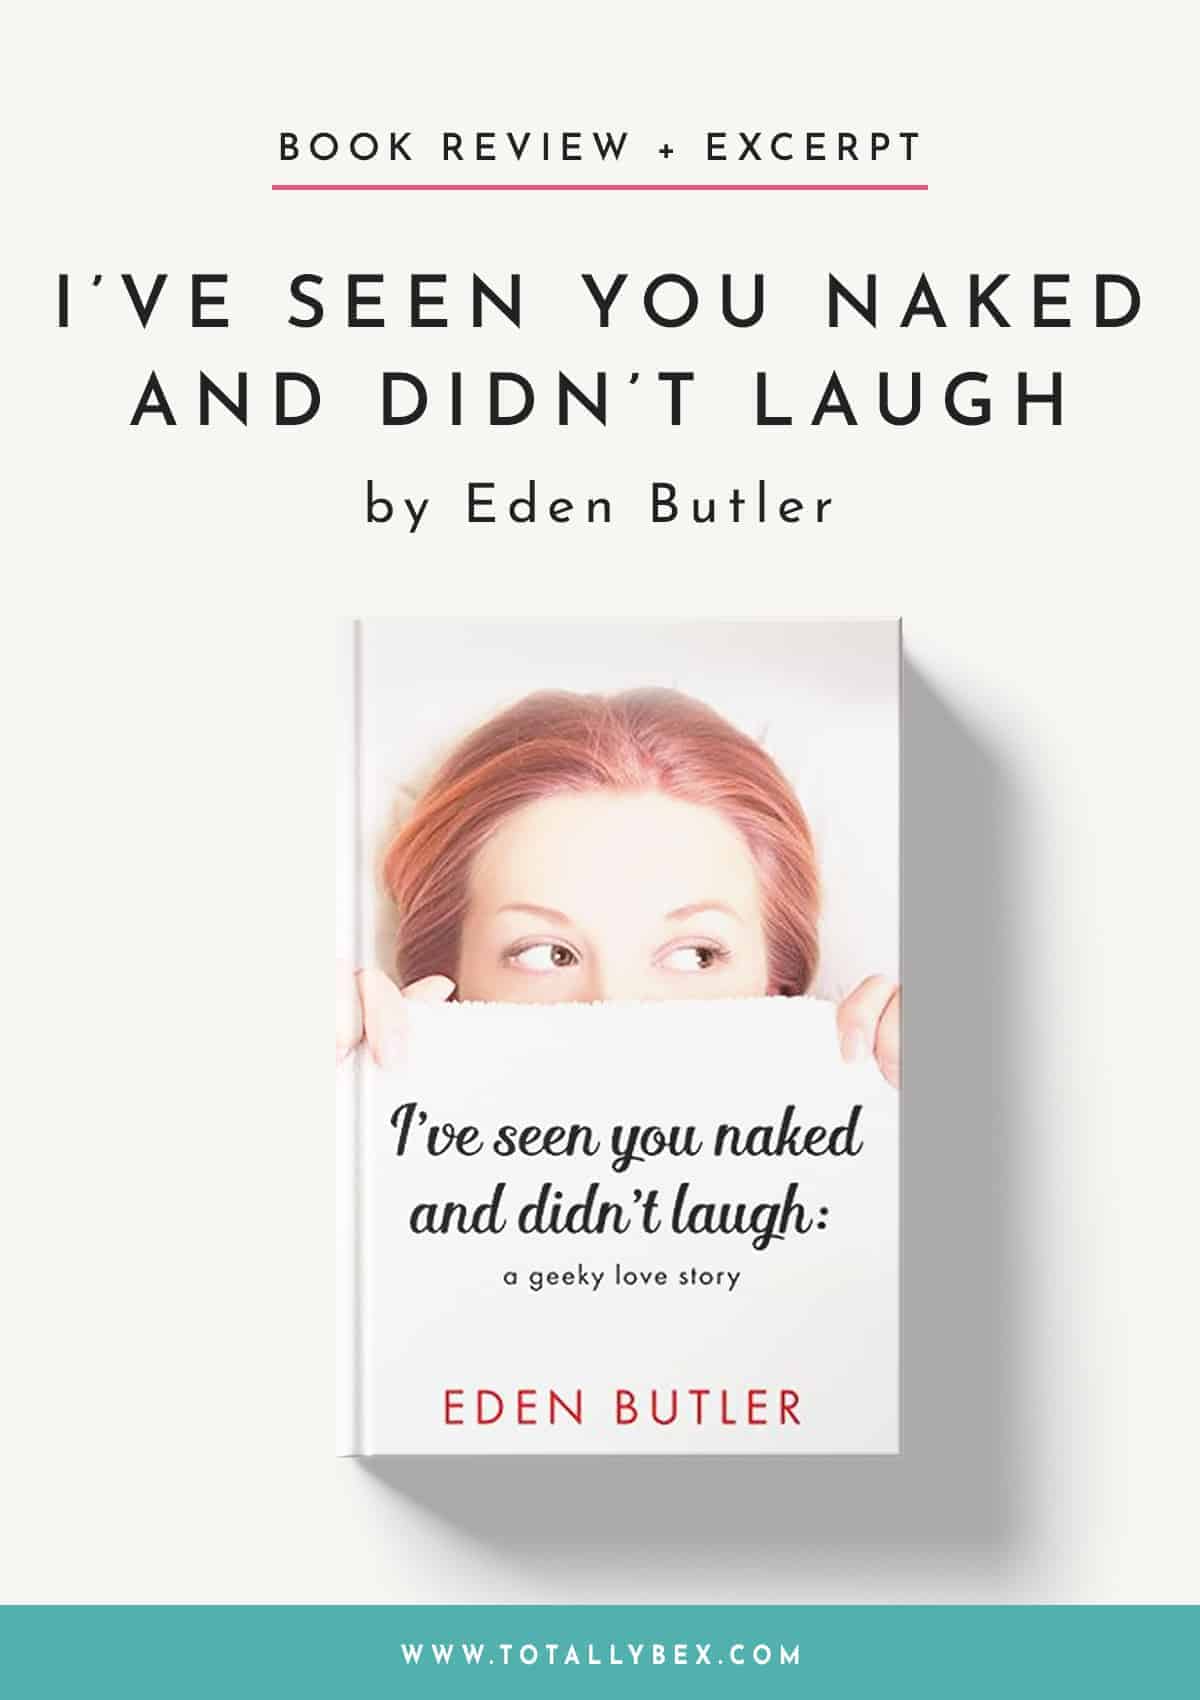 I’ve Seen You Naked and Didn’t Laugh by Eden Butler: A Geeky Love Story